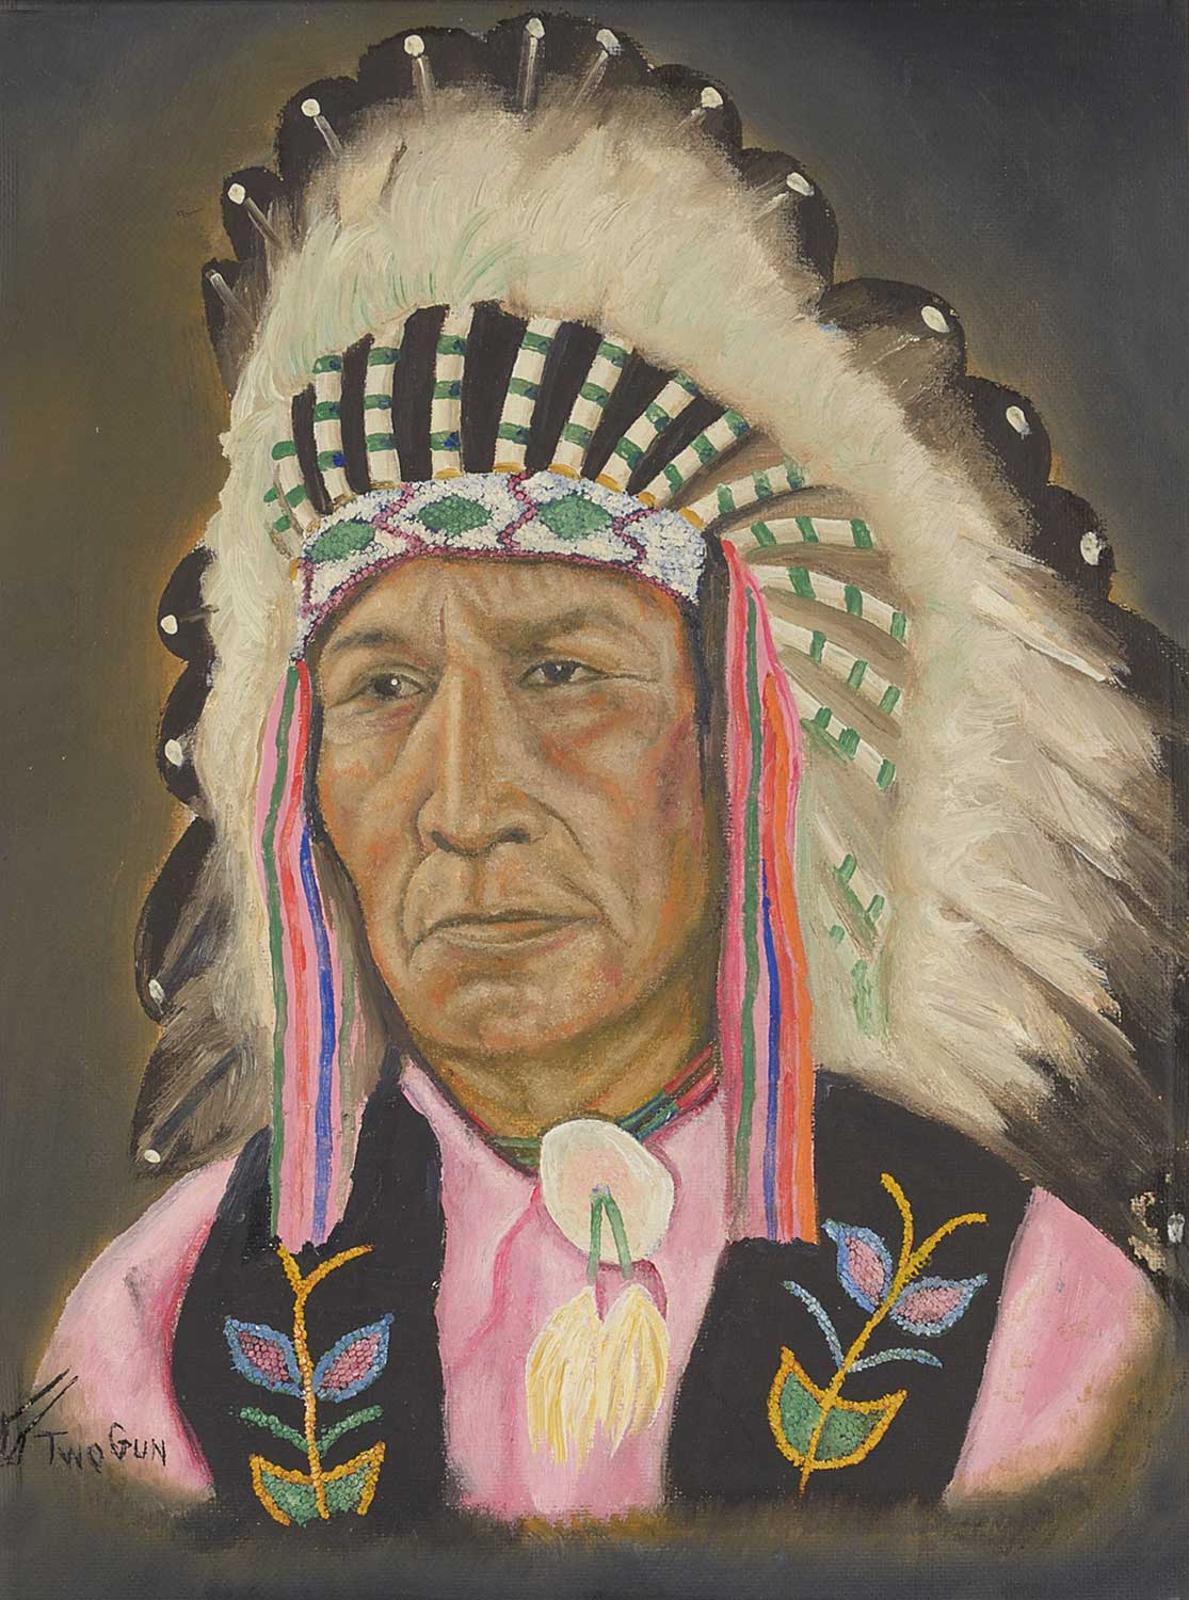 Percy [Two Gun] Plain Woman - Untitled - Indian Chief with Pink Shirt